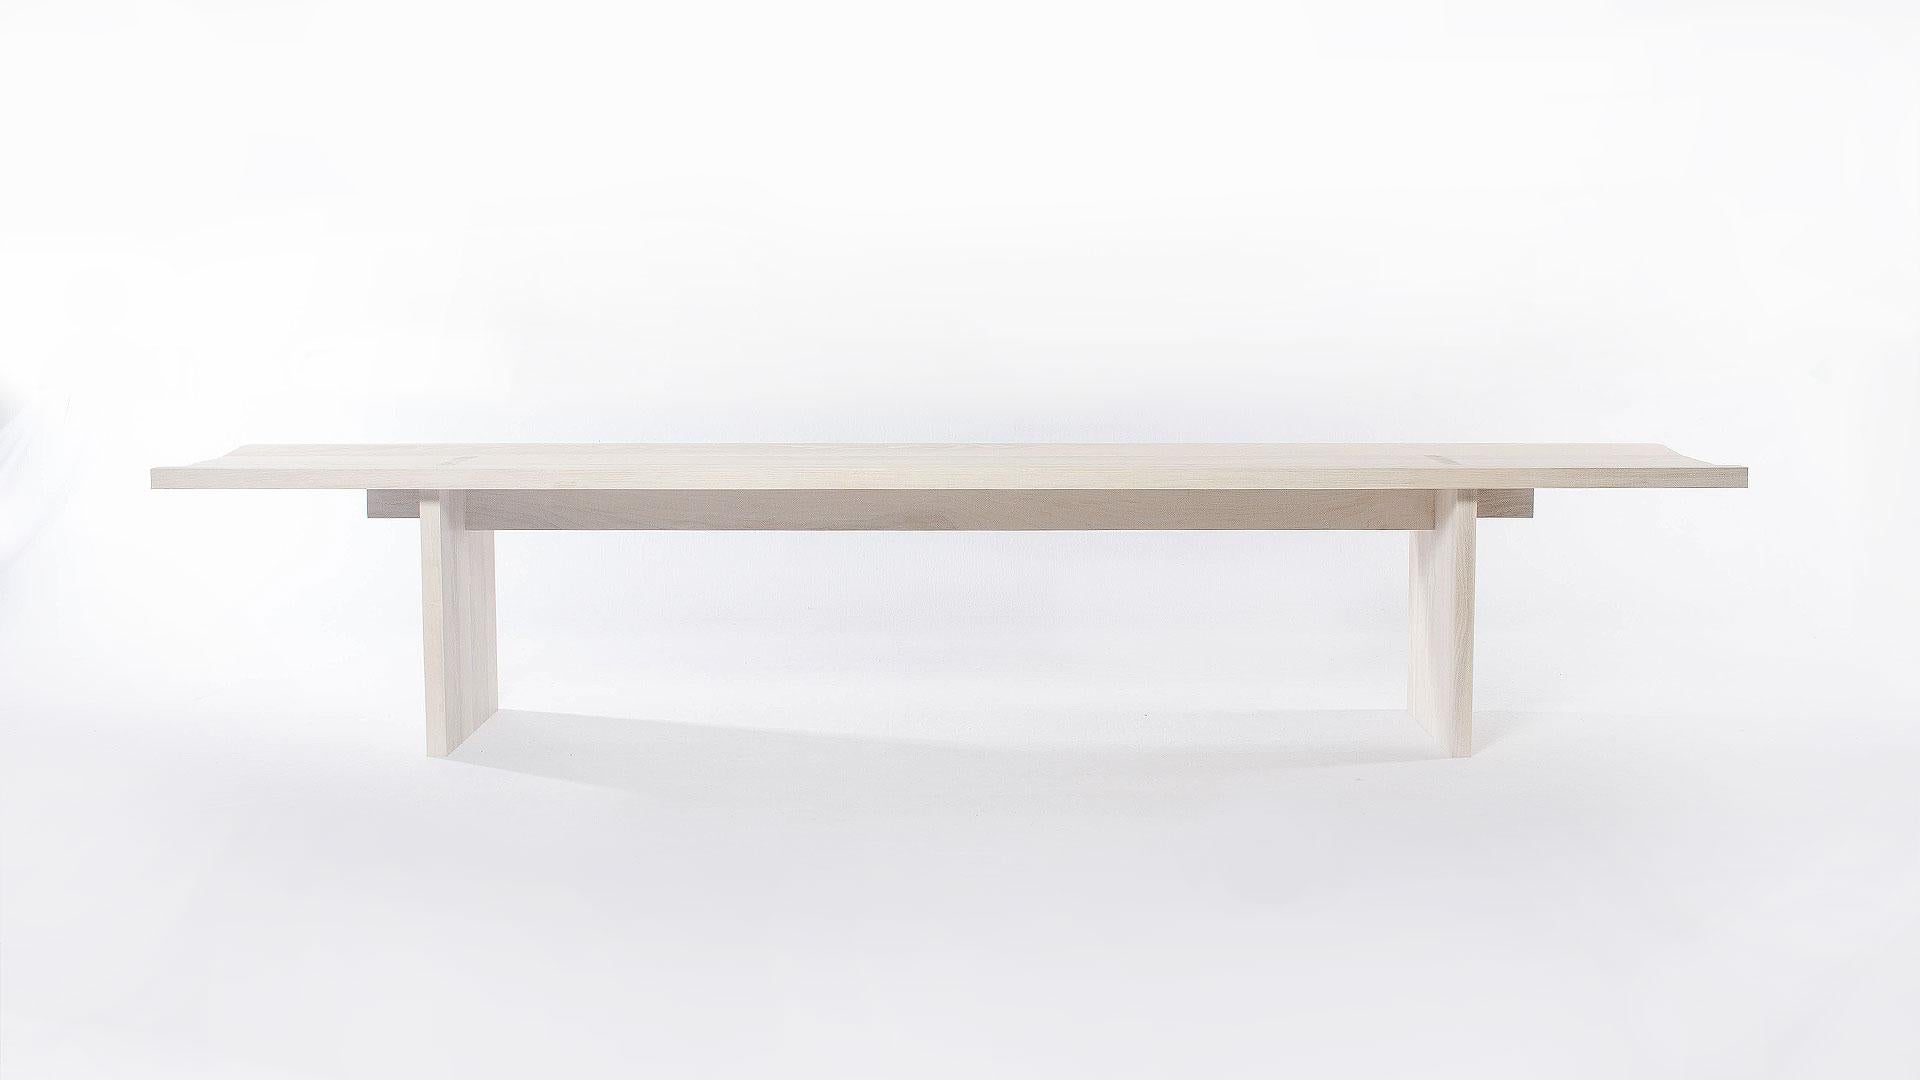 Originally created to pair with our Himes Table, the Himes Bench explores the principals of tension and compression. Each of the six parts that make up this piece fit into one and other and are held together using these forces of strength and